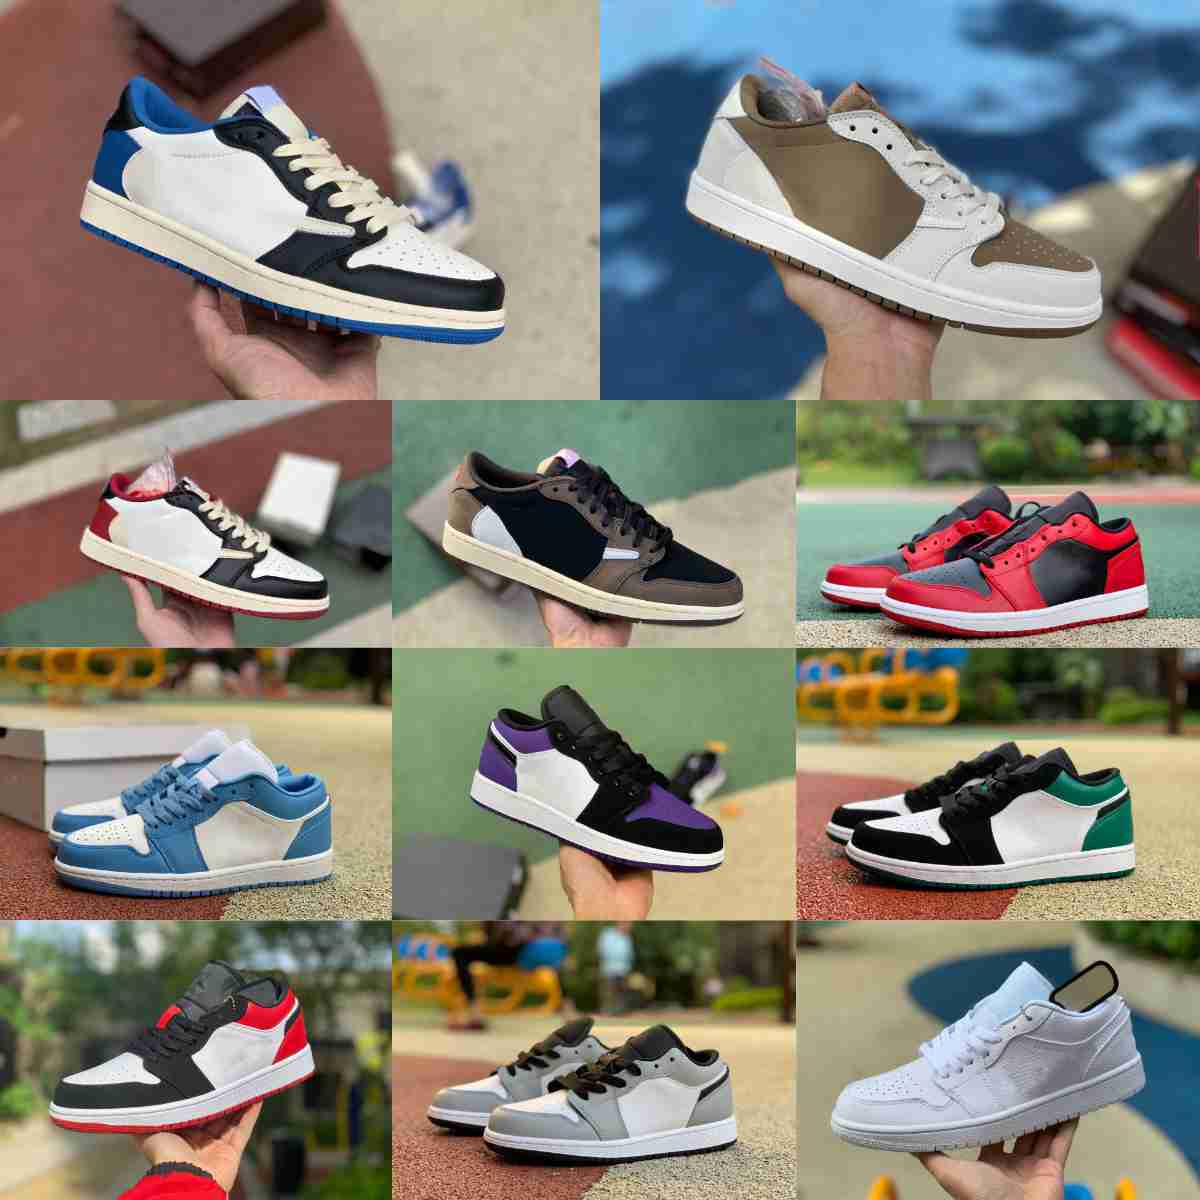 

Trainer Fragment TS Travis Low Basketball Shoes Jumpman X 1 1S White Brown Banned UNC Court Purple Black Toe Shadow Hyper Royal Scottss Crimson Tint RED Sneakers S9, Please contact us